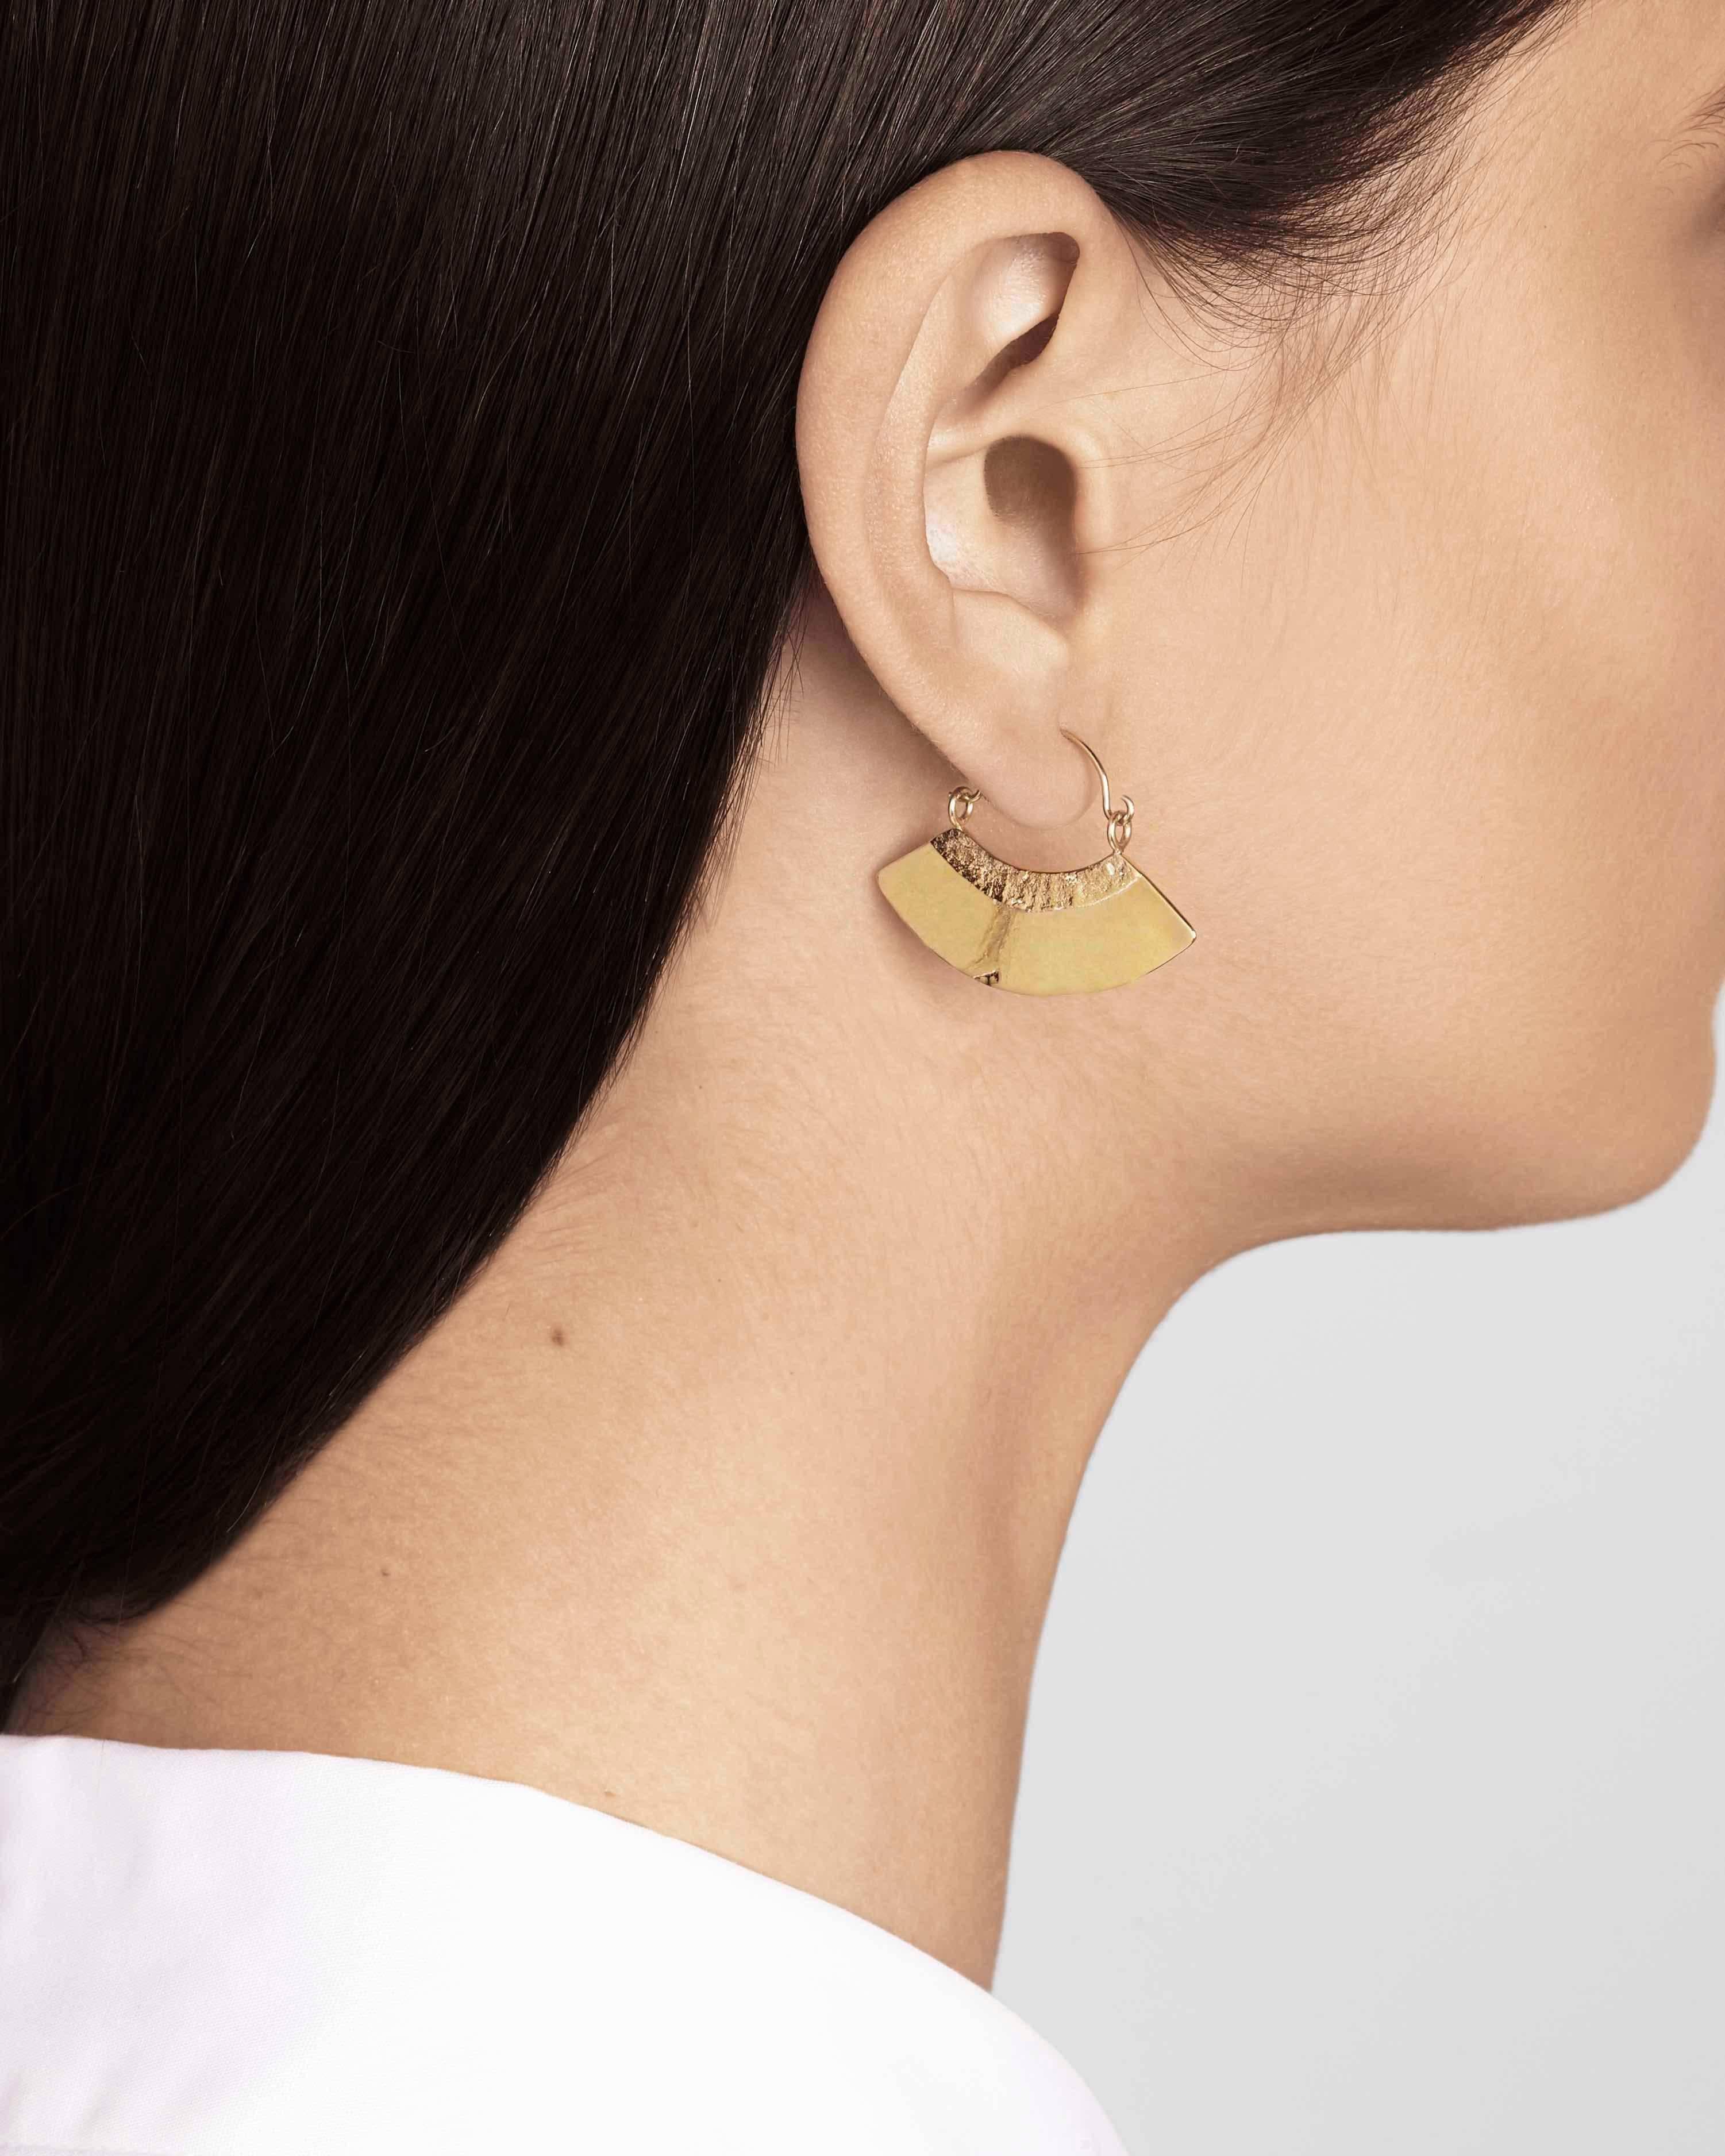 These fan-shaped statement earrings are handcrafted in 18-carat gold-plated sterling silver with gold-filled ear wires.  Fans measure 1.1 cm wide by 3.3 cm long.  

Handmade in Allison Bryan's London studio.



